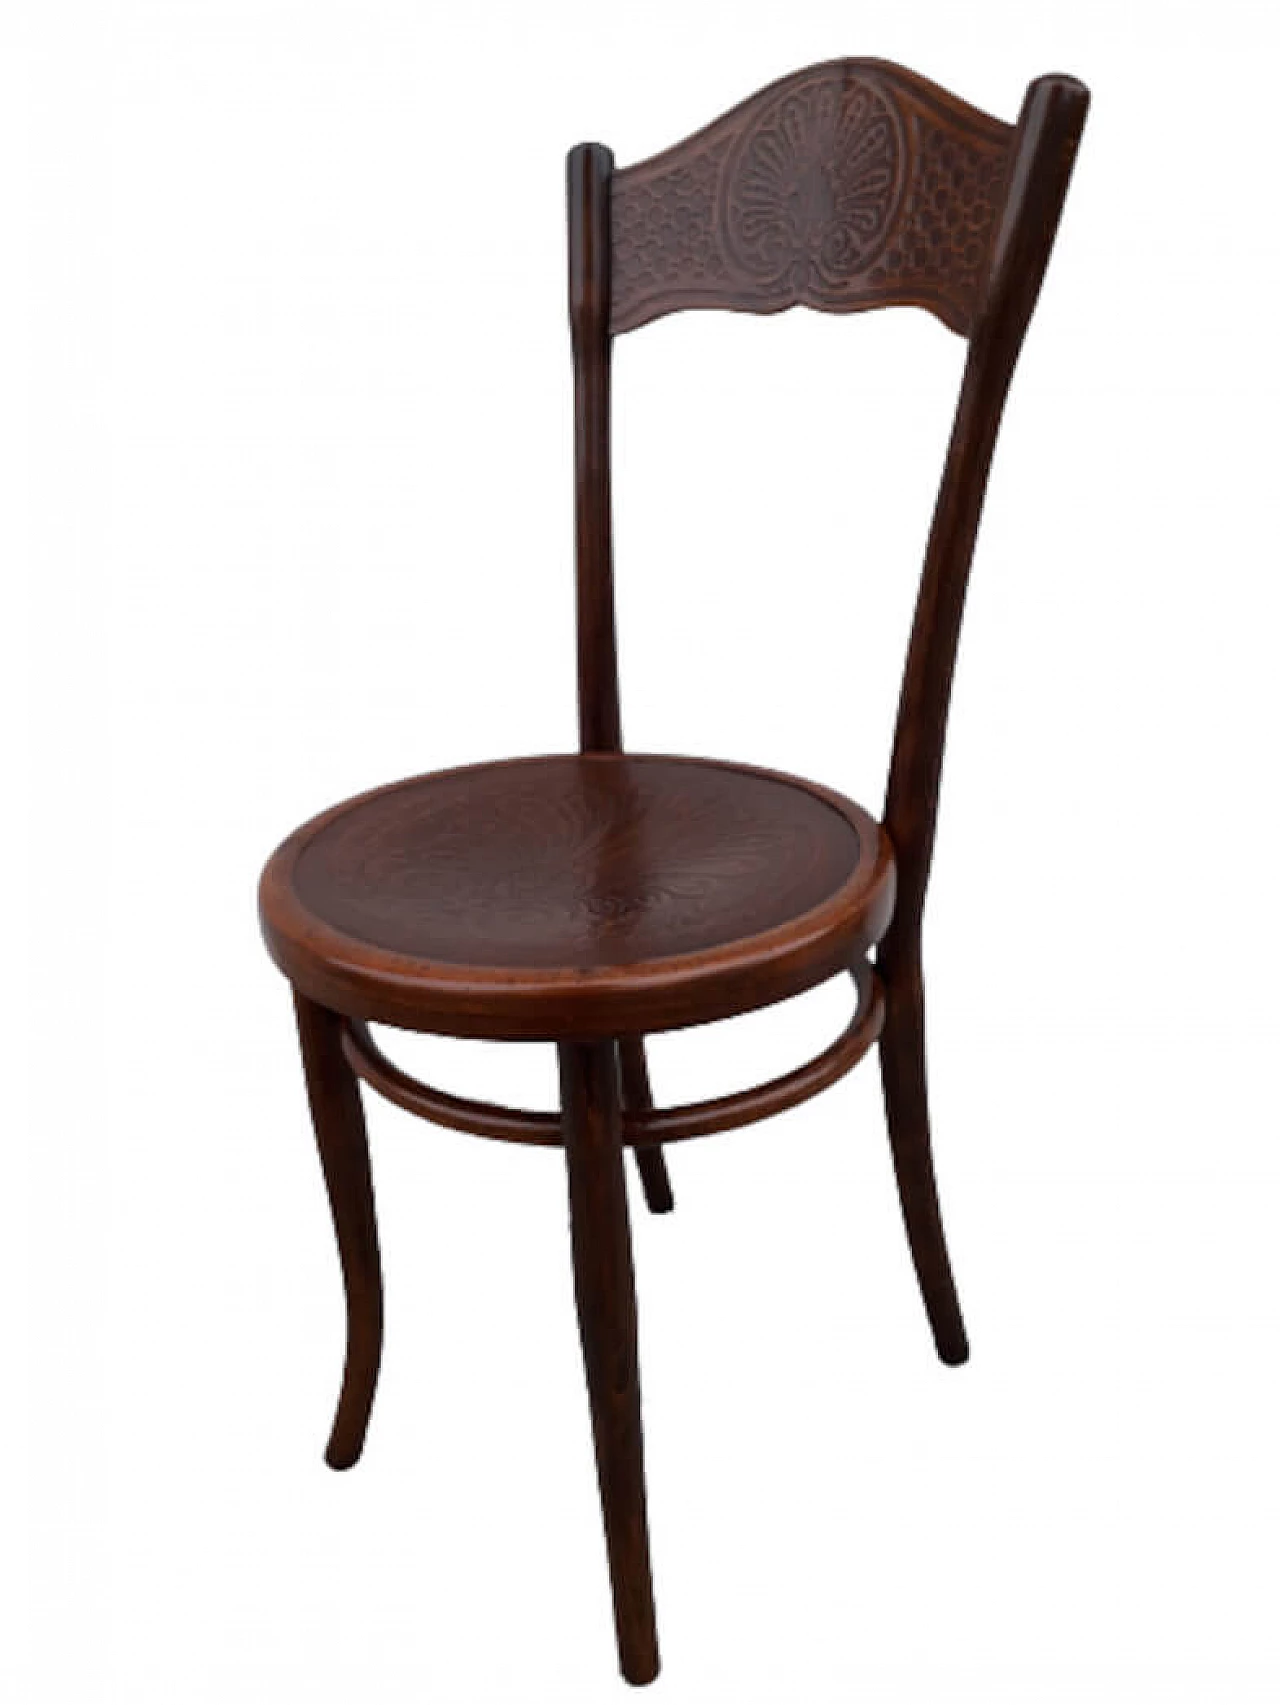 Bent beech chair for Thonet Mundus, early 20th century 1